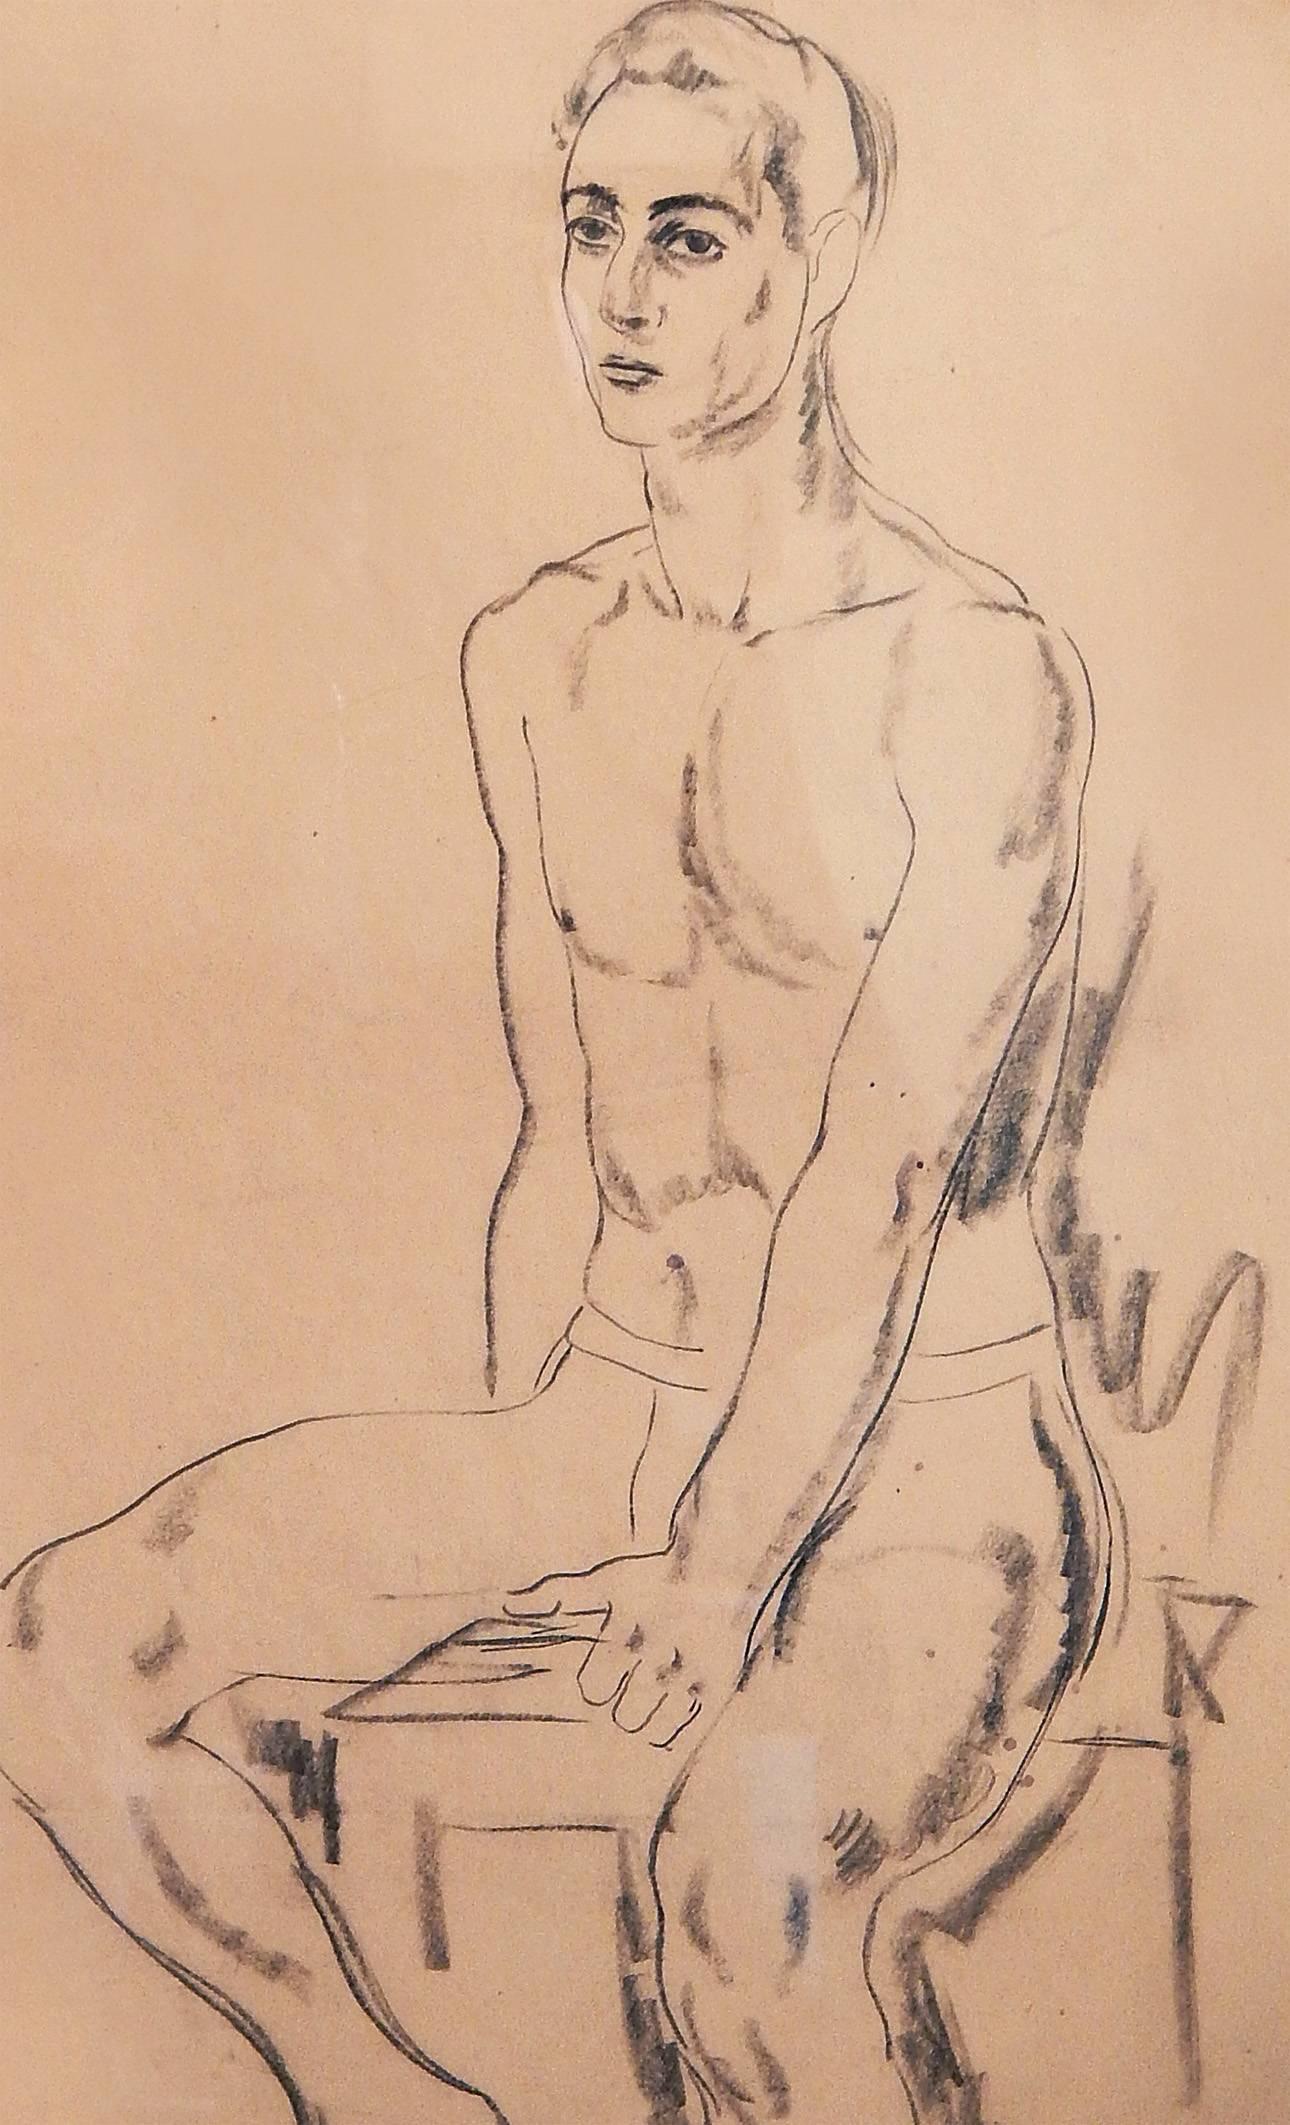 Although William Baziotes is justifiably famous for his Surrealist and Biomorphic paintings later in his career, his extraordinary talent is evident in his early works as well. This drawing of a nude male model, no doubt executed at the National